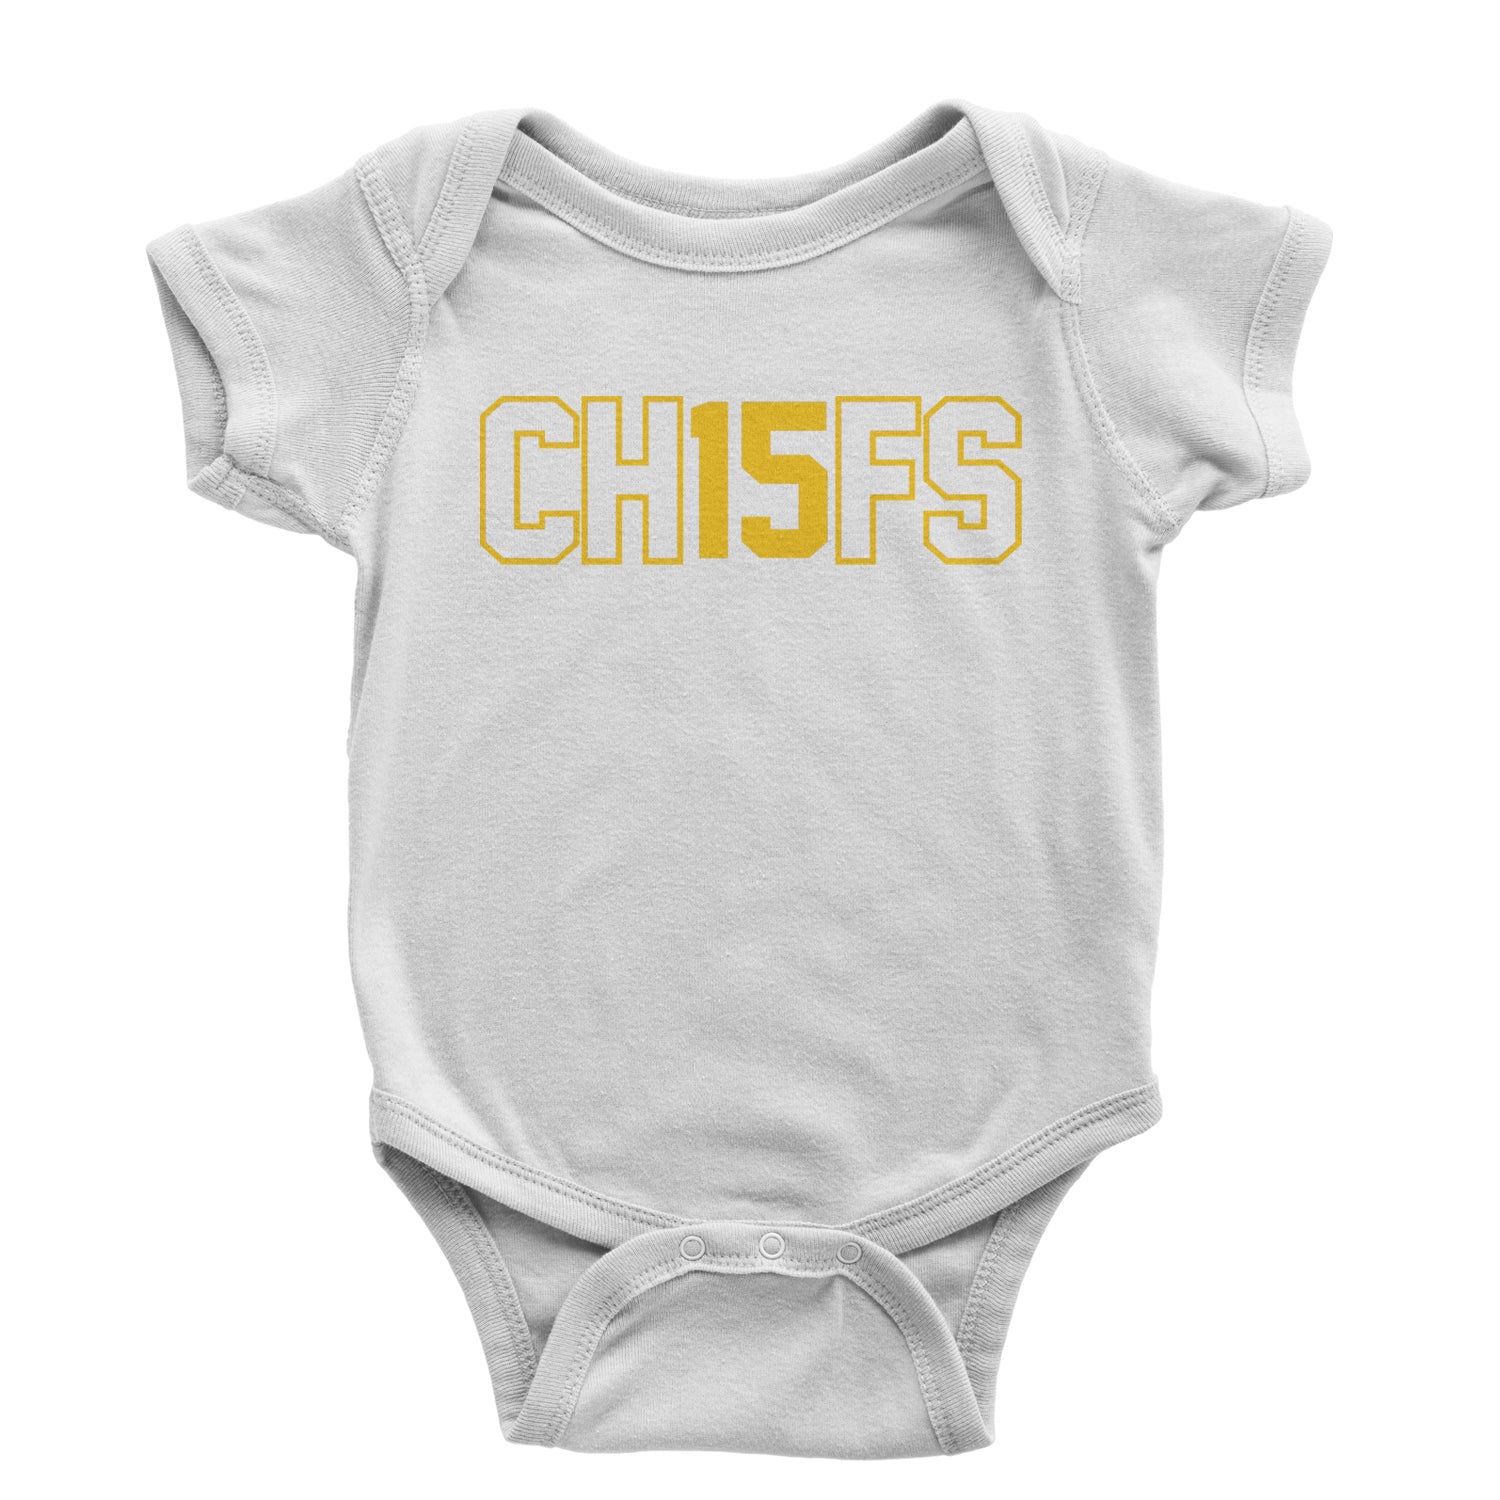 Ch15fs Chief 15 Shirt Infant One-Piece Romper Bodysuit and Toddler T-shirt ass, big, burrowhead, game, kelce, know, moutha, my, nd, patrick, role, shut, sports, your by Expression Tees